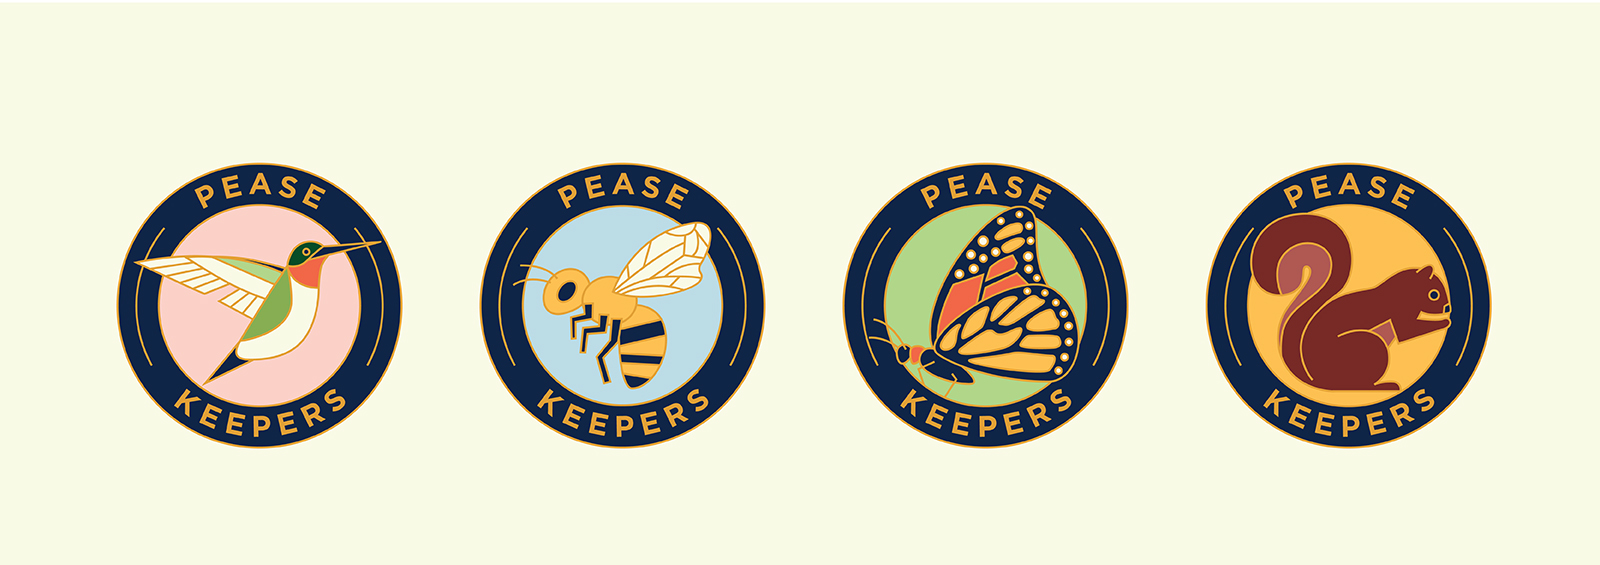 pease park icons "pease keepers"